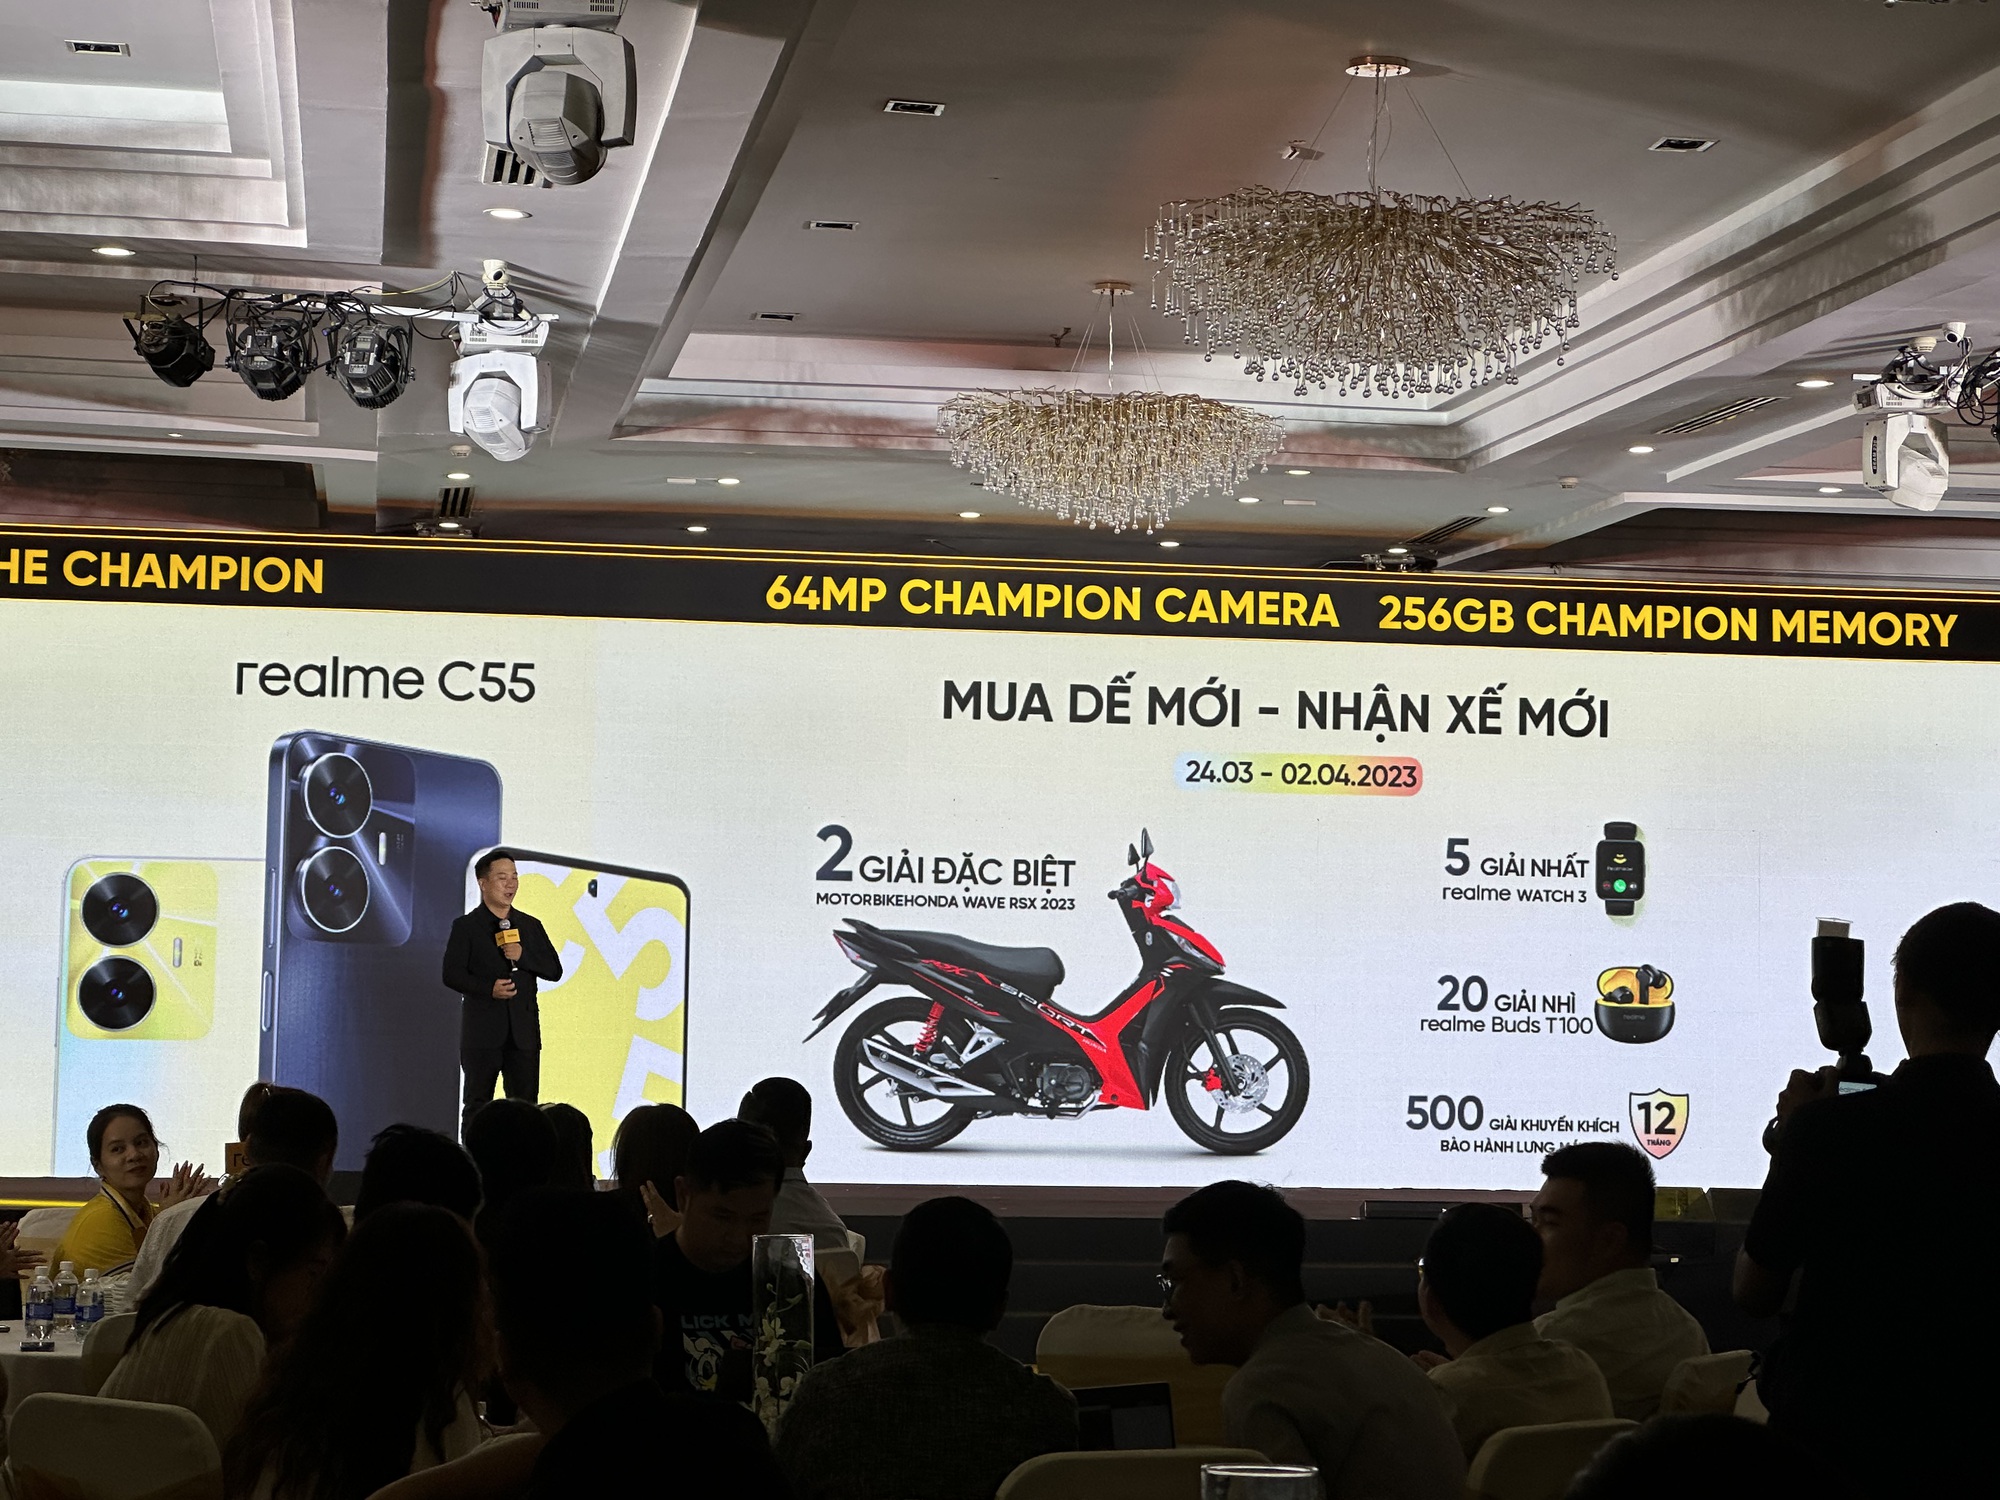 realme C55 was launched with complete equipment to buyers as a technical driver, with a price of less than 5 million - Picture 10.